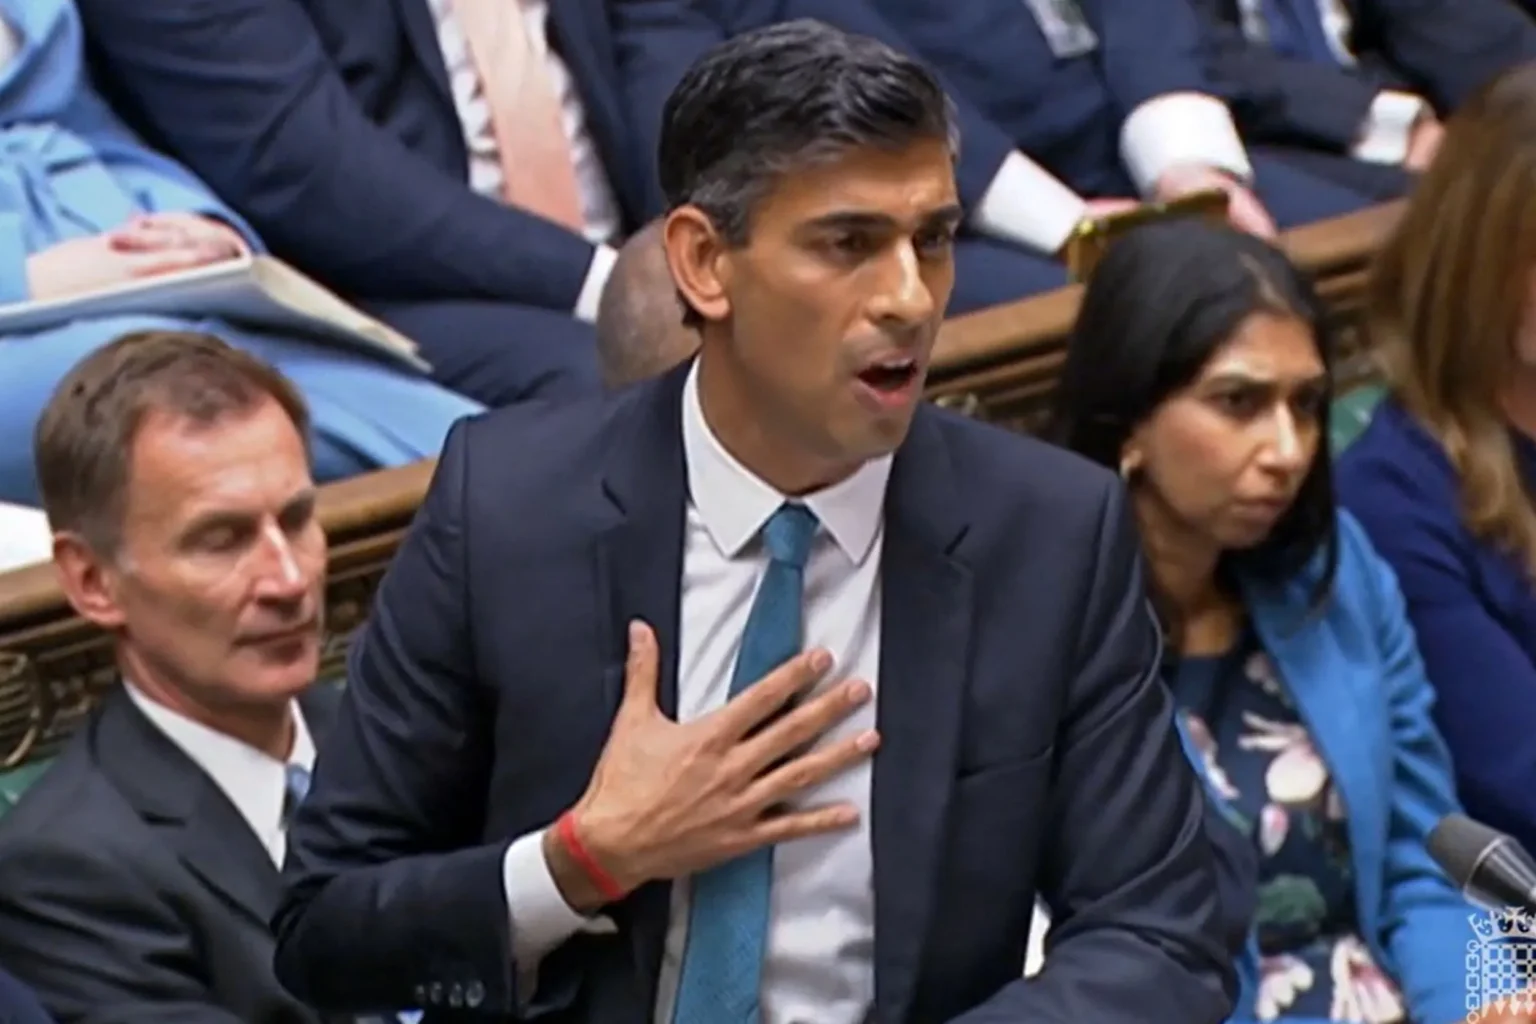 Sunak faces PMQs amid Tory row over call for him to quit